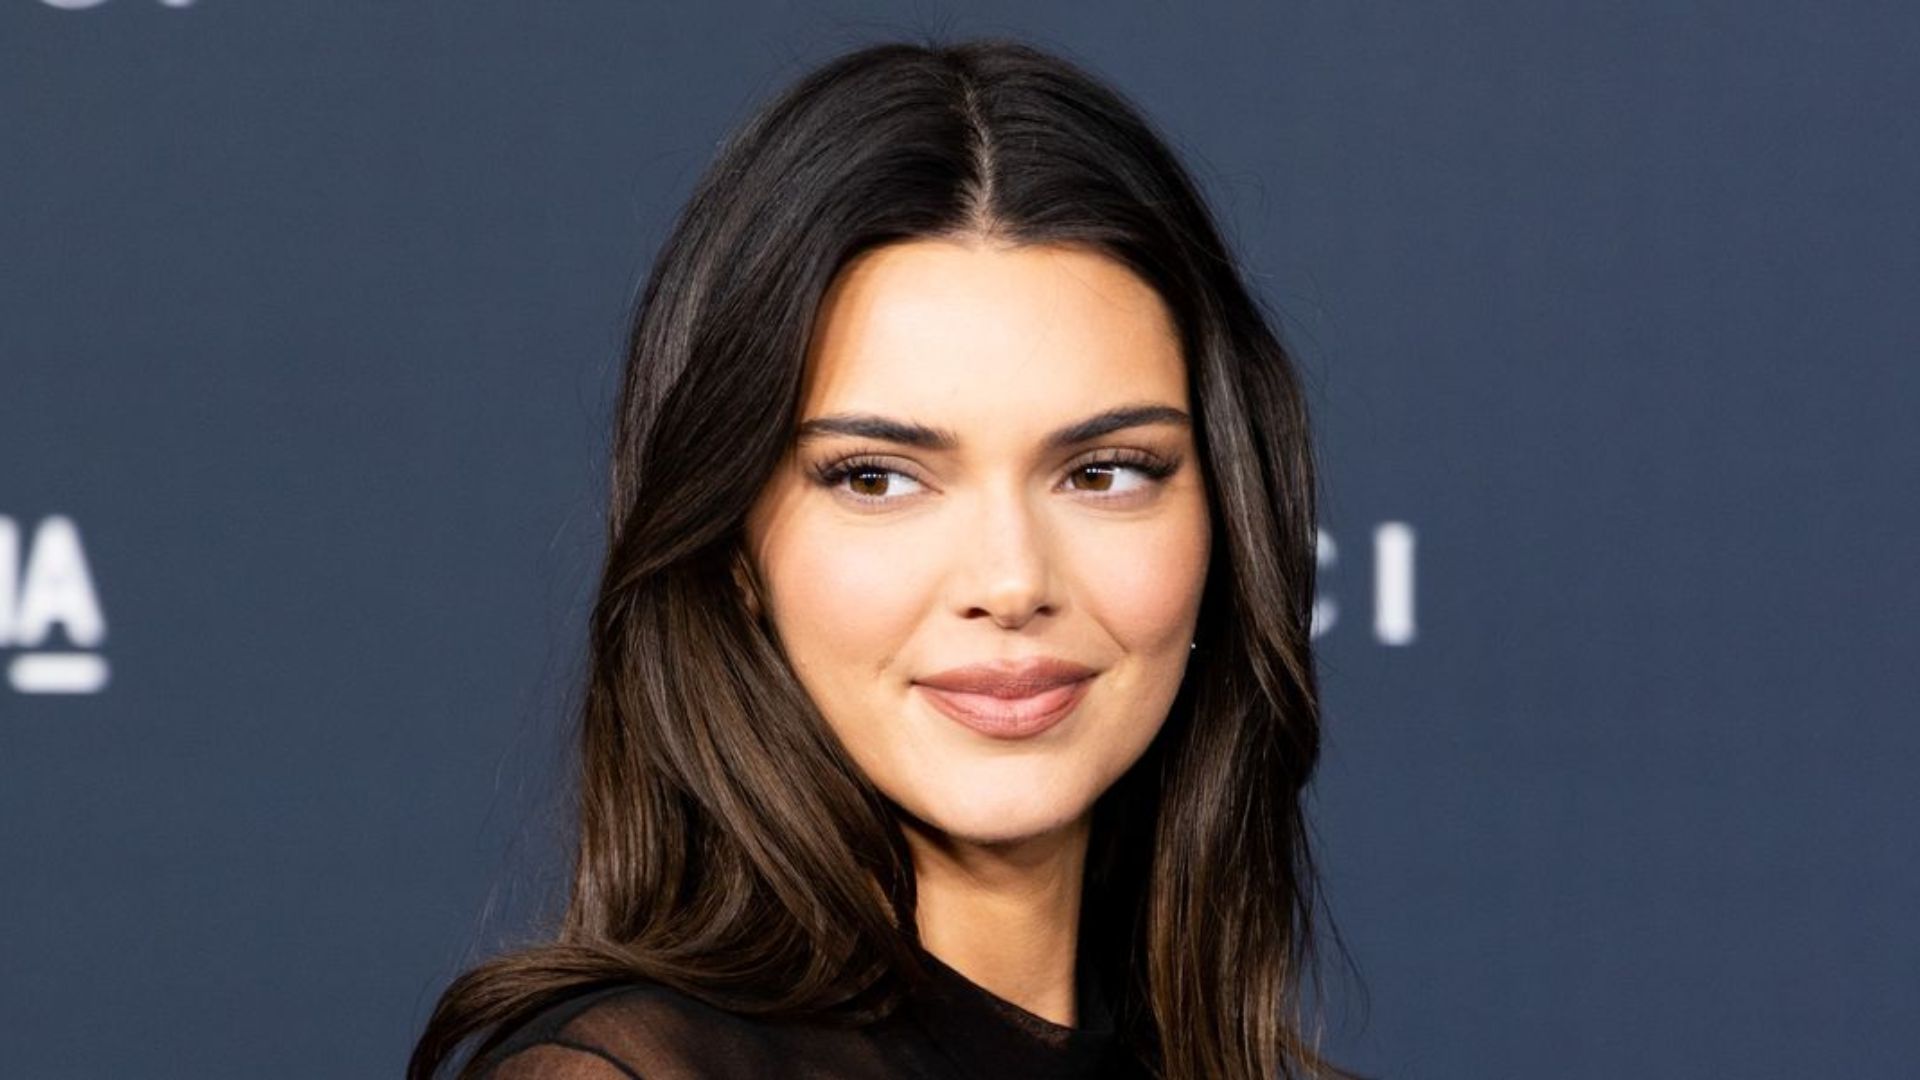 We cannot stop staring at Kendall Jenner's *dramatically* overlined ...